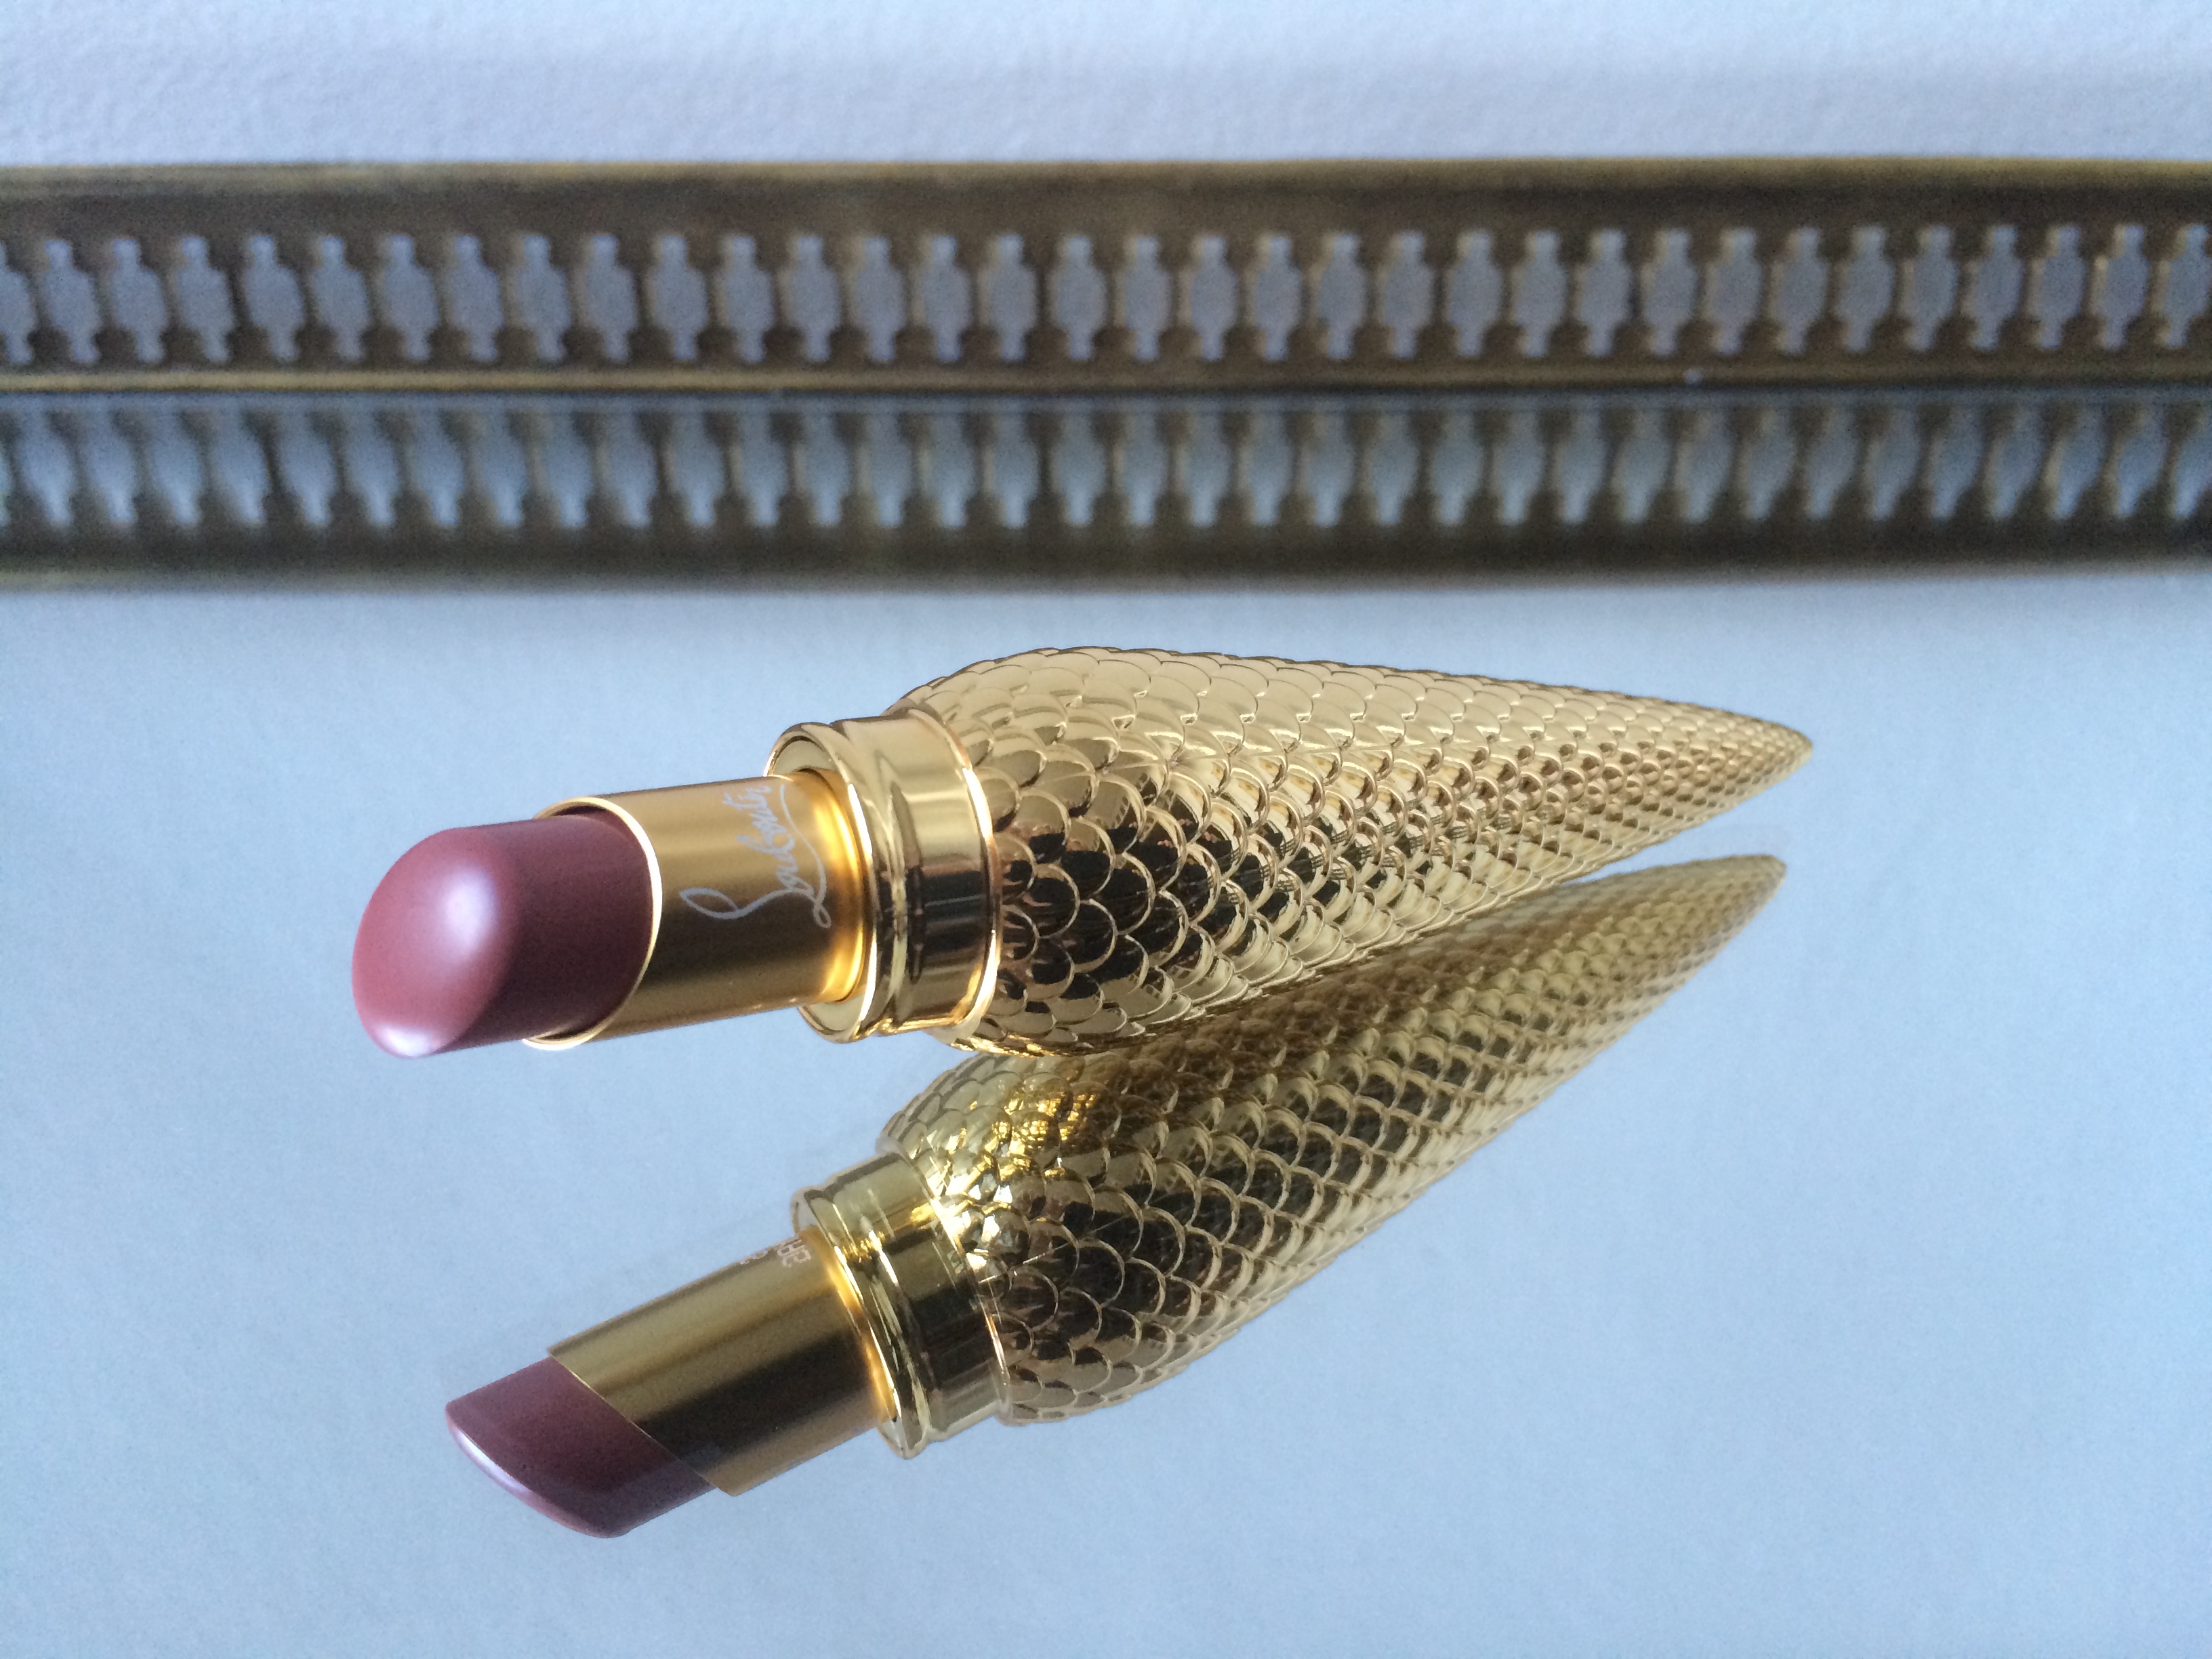 CHRISTIAN LOUBOUTIN introduces new shades of sheer voile lip